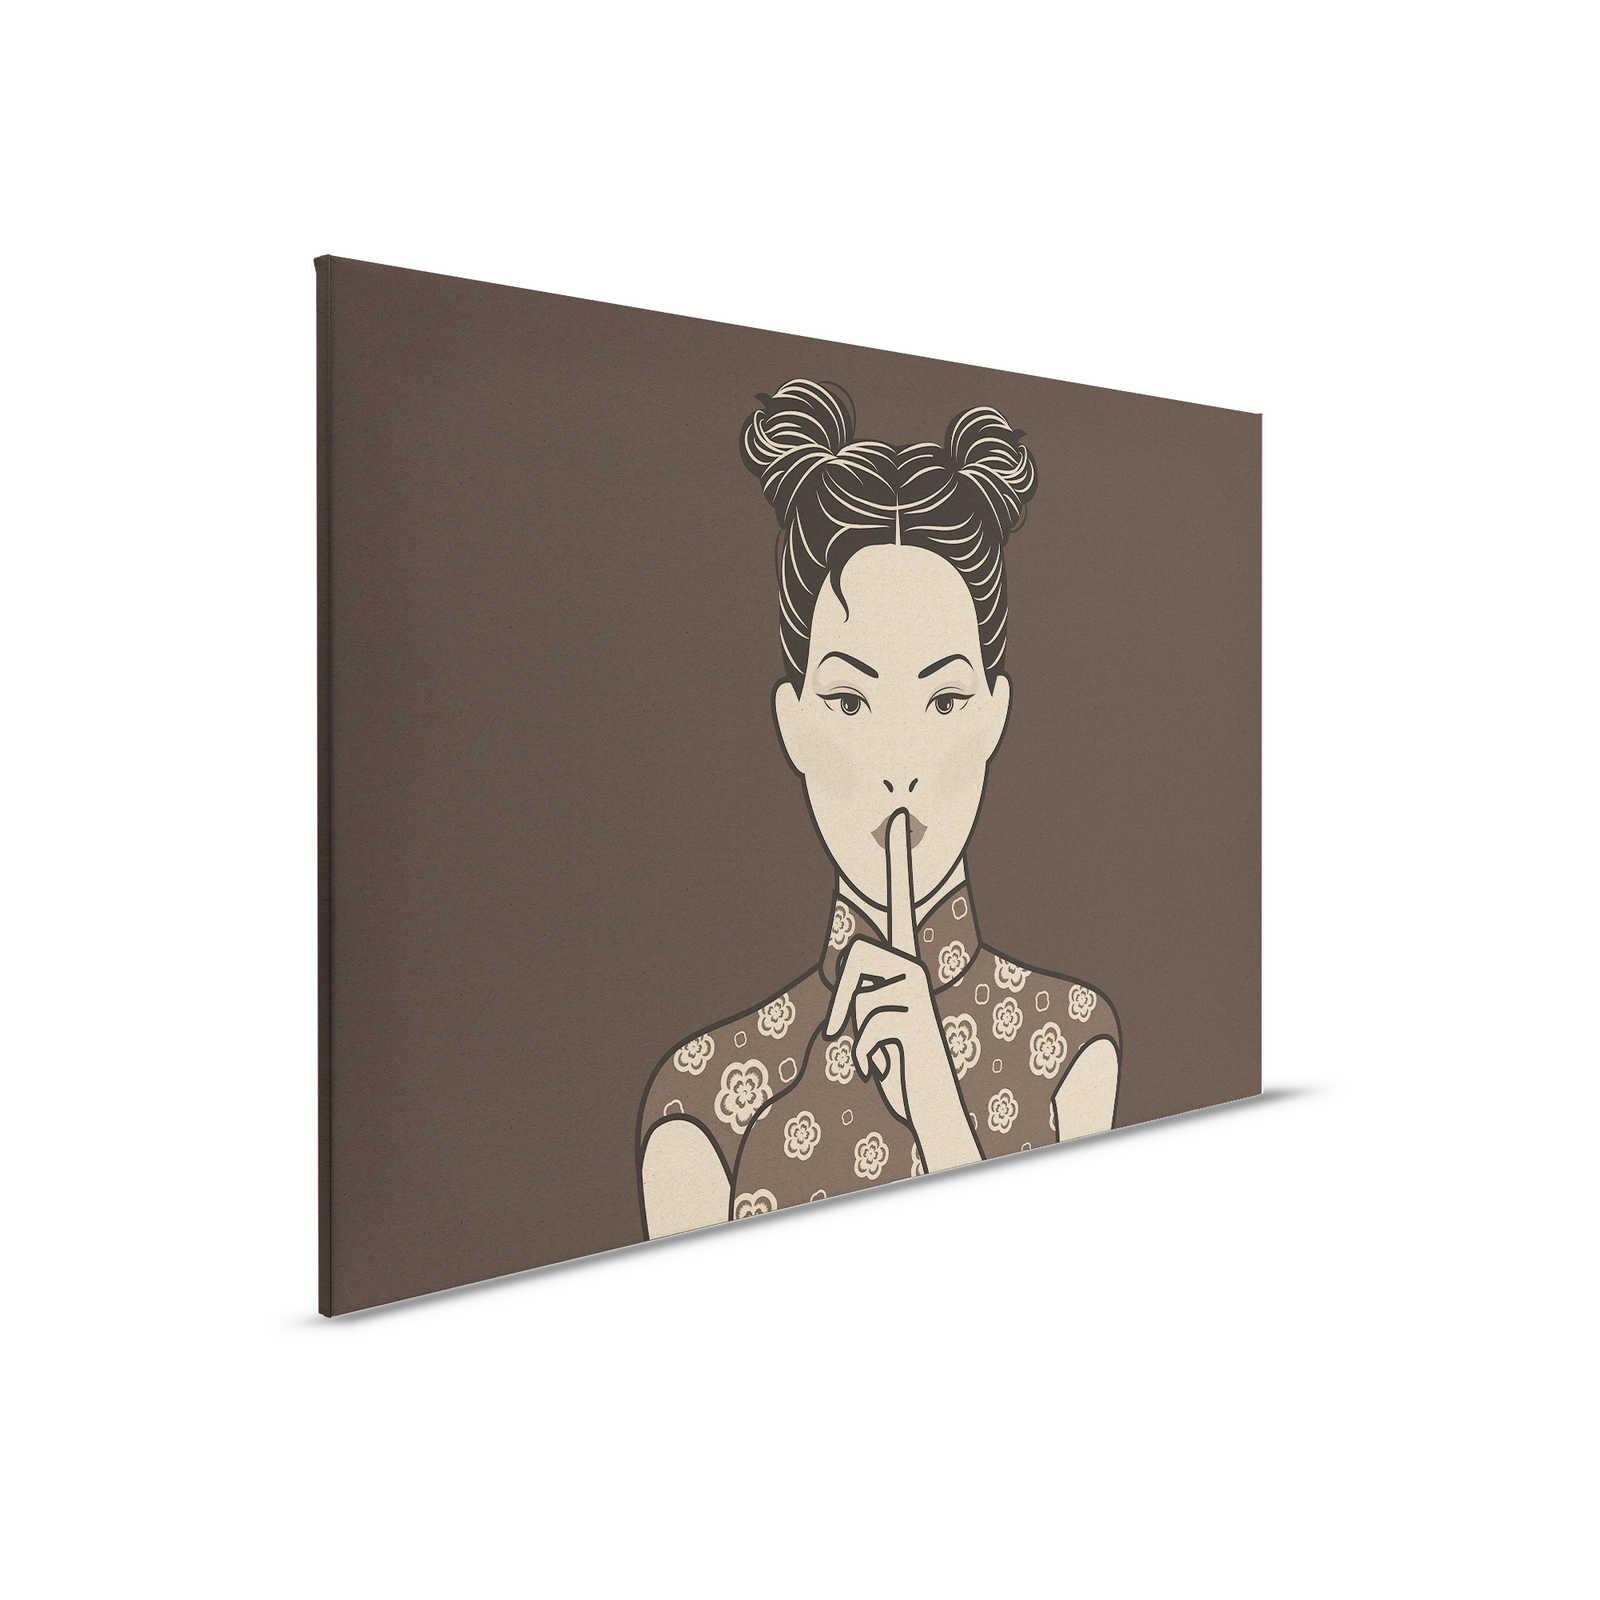         Himari 2 - pssst, manga style on canvas picture - cardboard structure - 0.90 m x 0.60 m
    